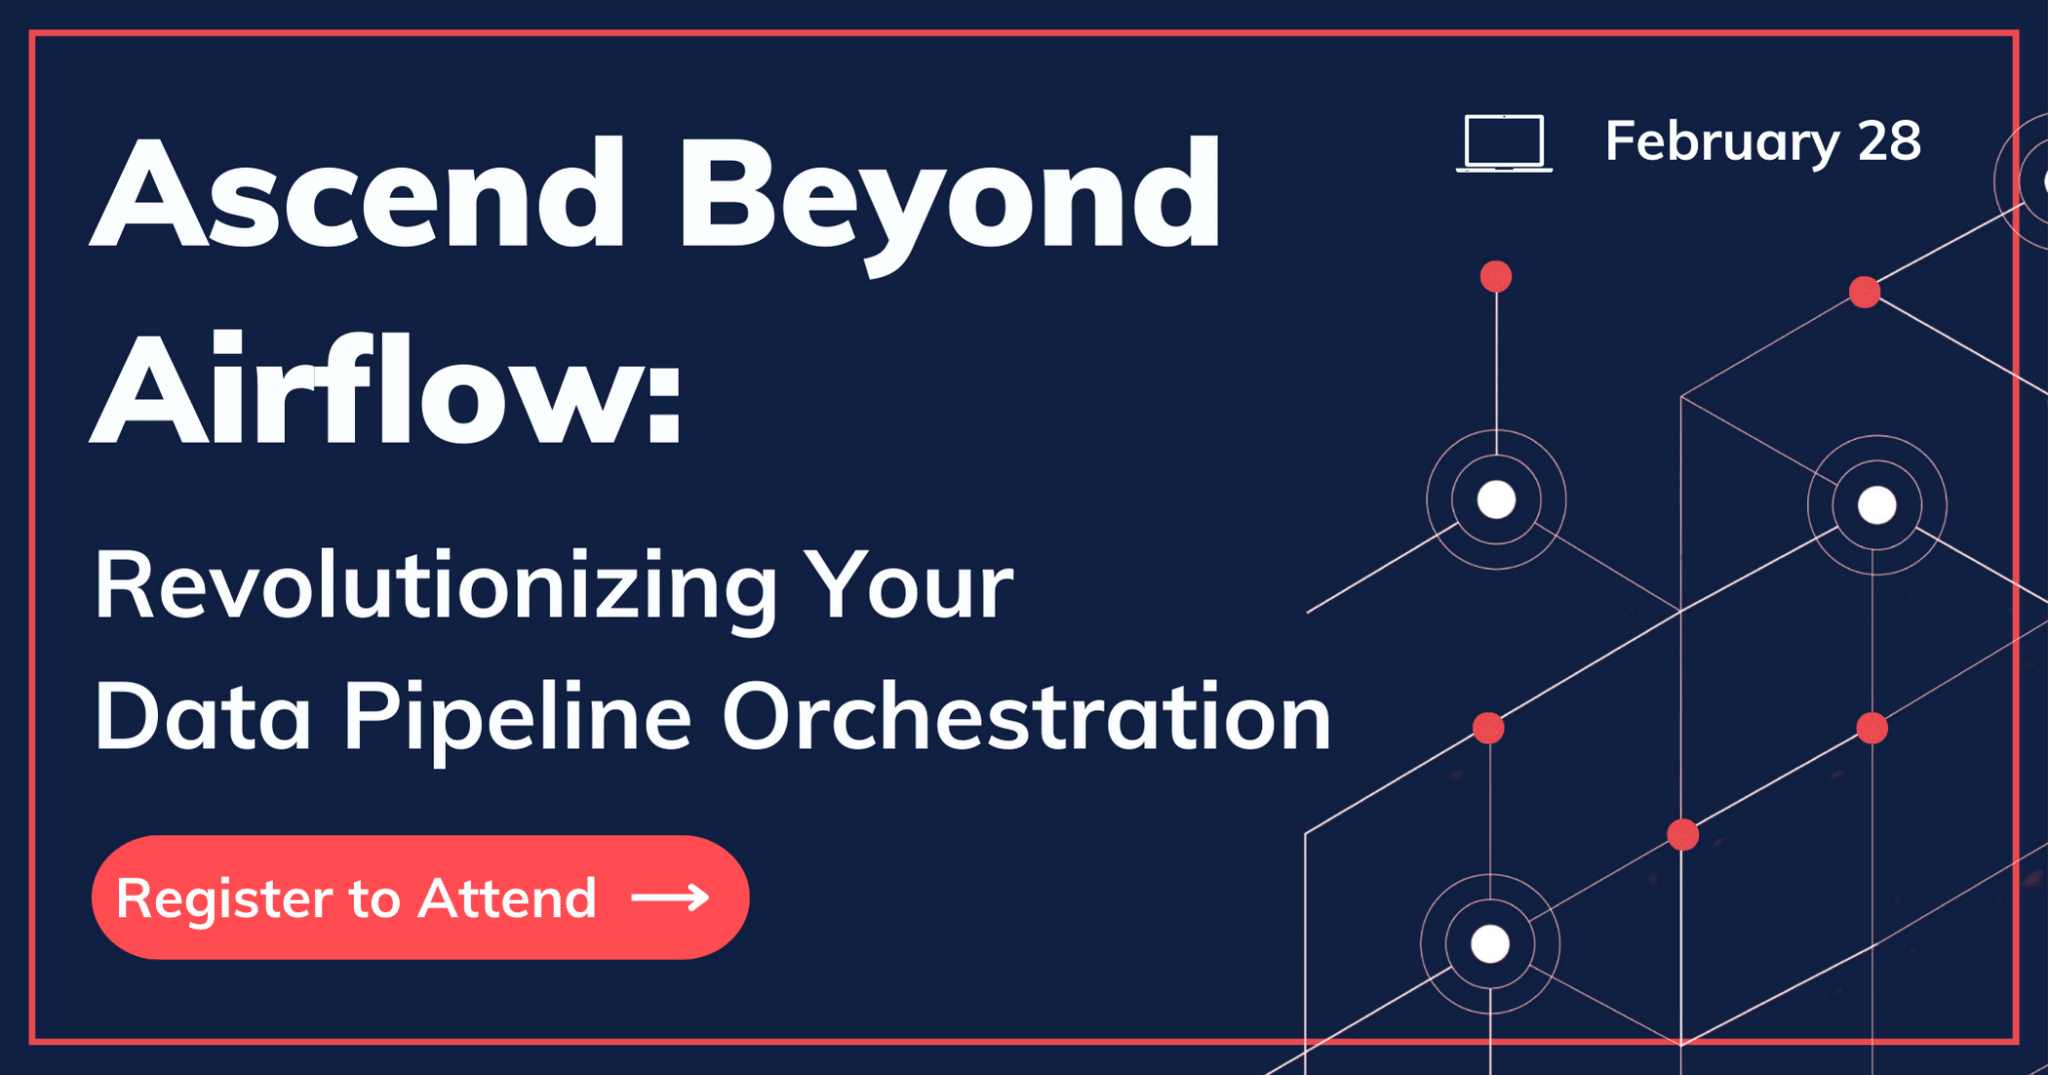 Ascend Beyond Airflow: Revolutionizing Your Data Pipeline Orchestration